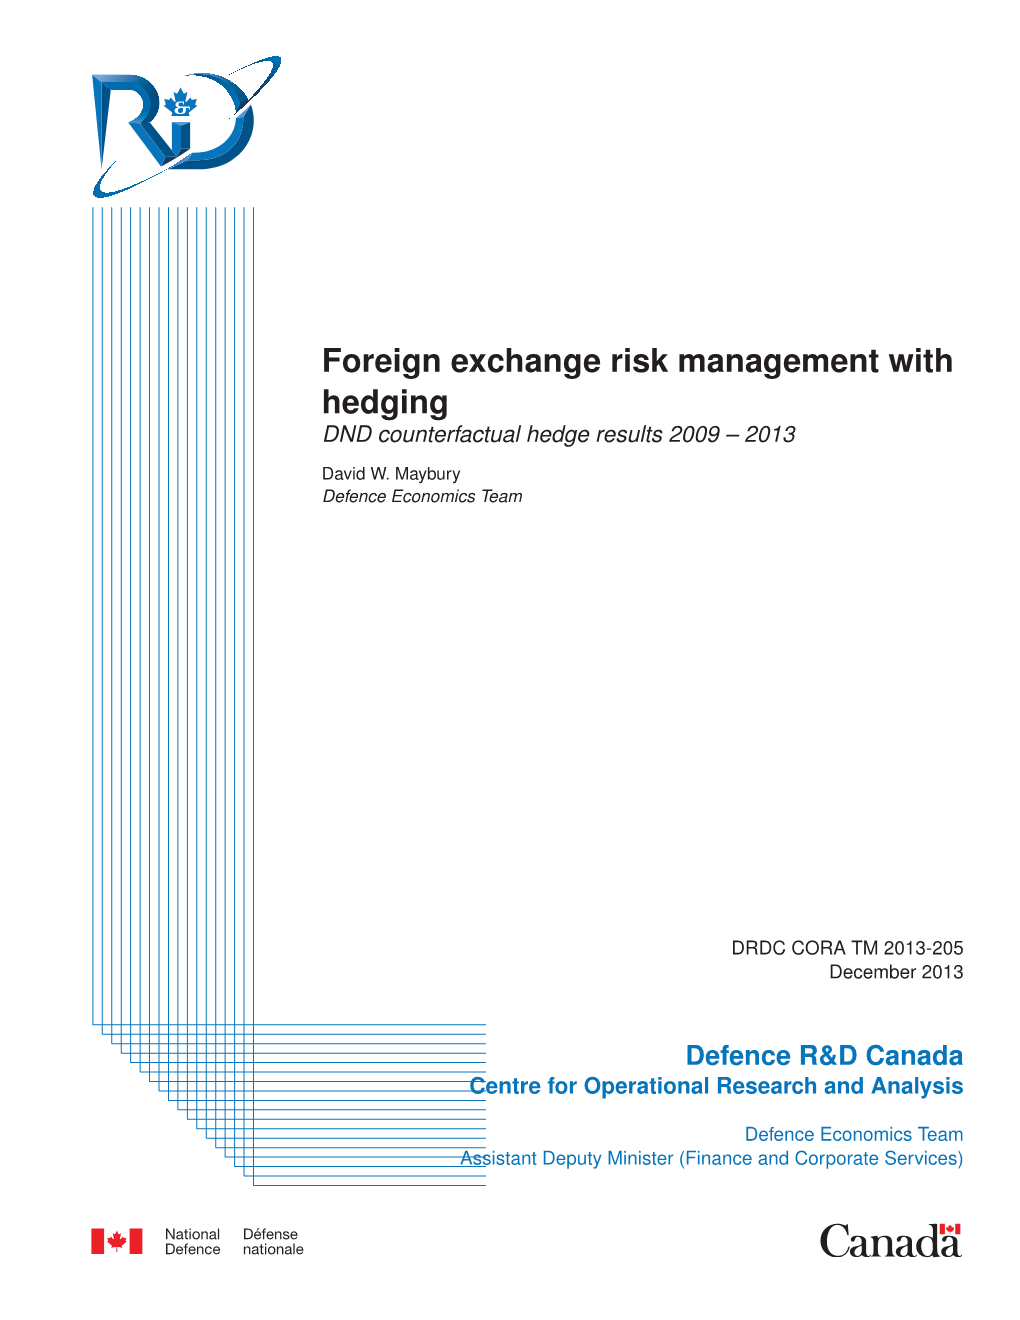 Foreign Exchange Risk Management with Hedging DND Counterfactual Hedge Results 2009 – 2013